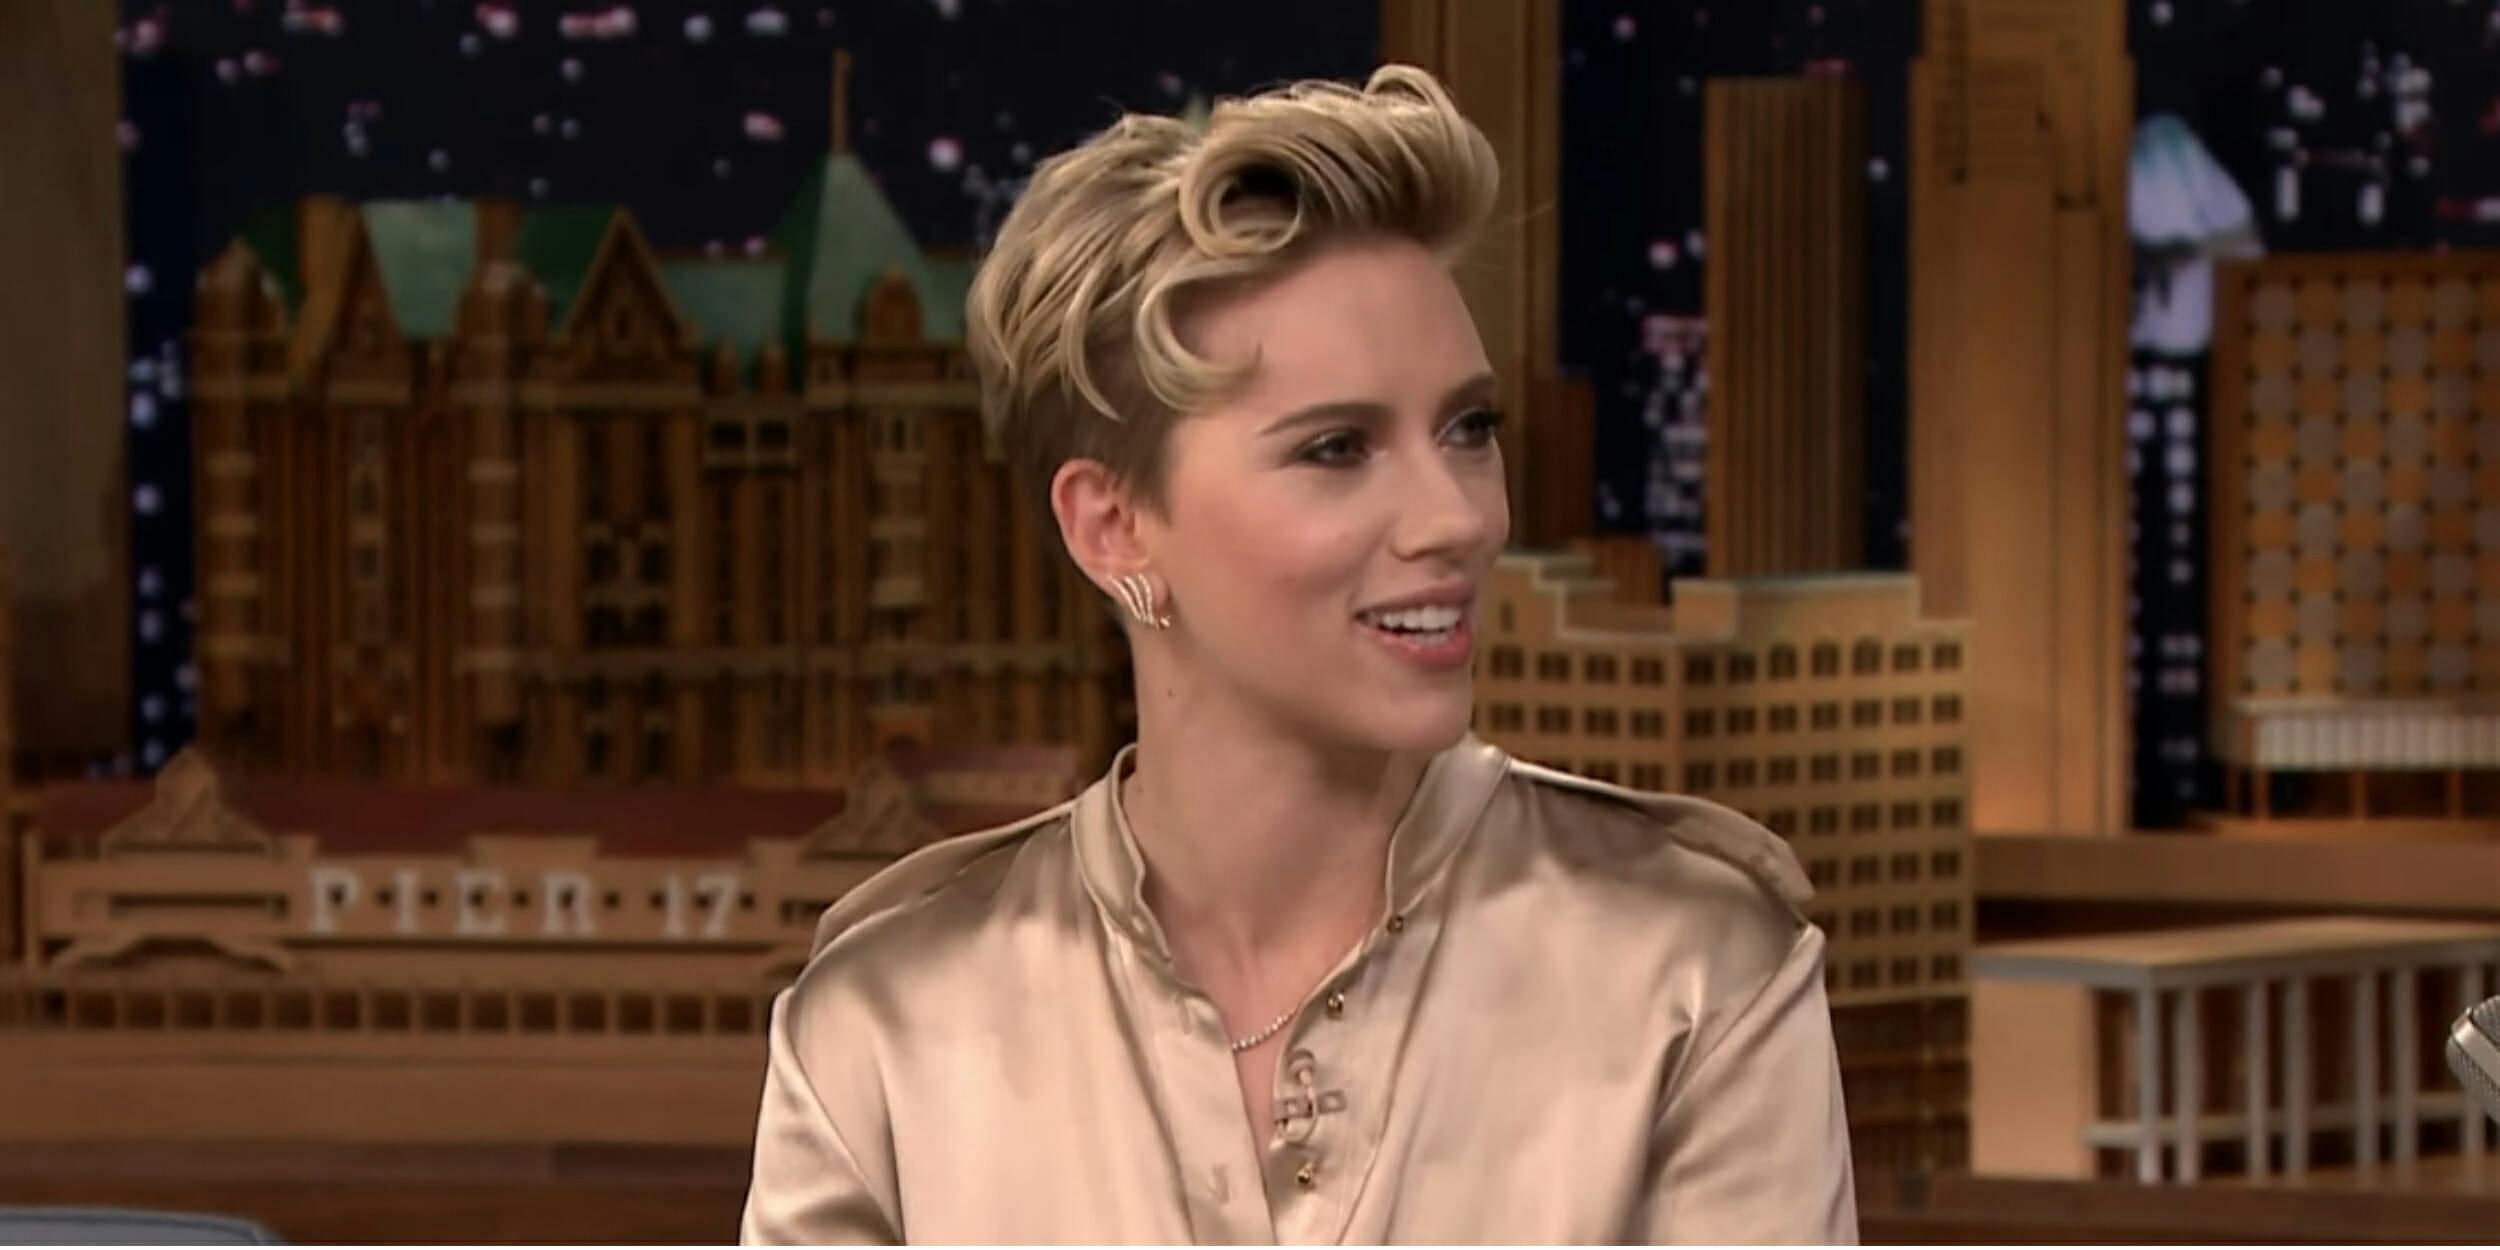 Scarlett Johansson Backs Out Of Rub And Tug Trans Role The Daily Dot 